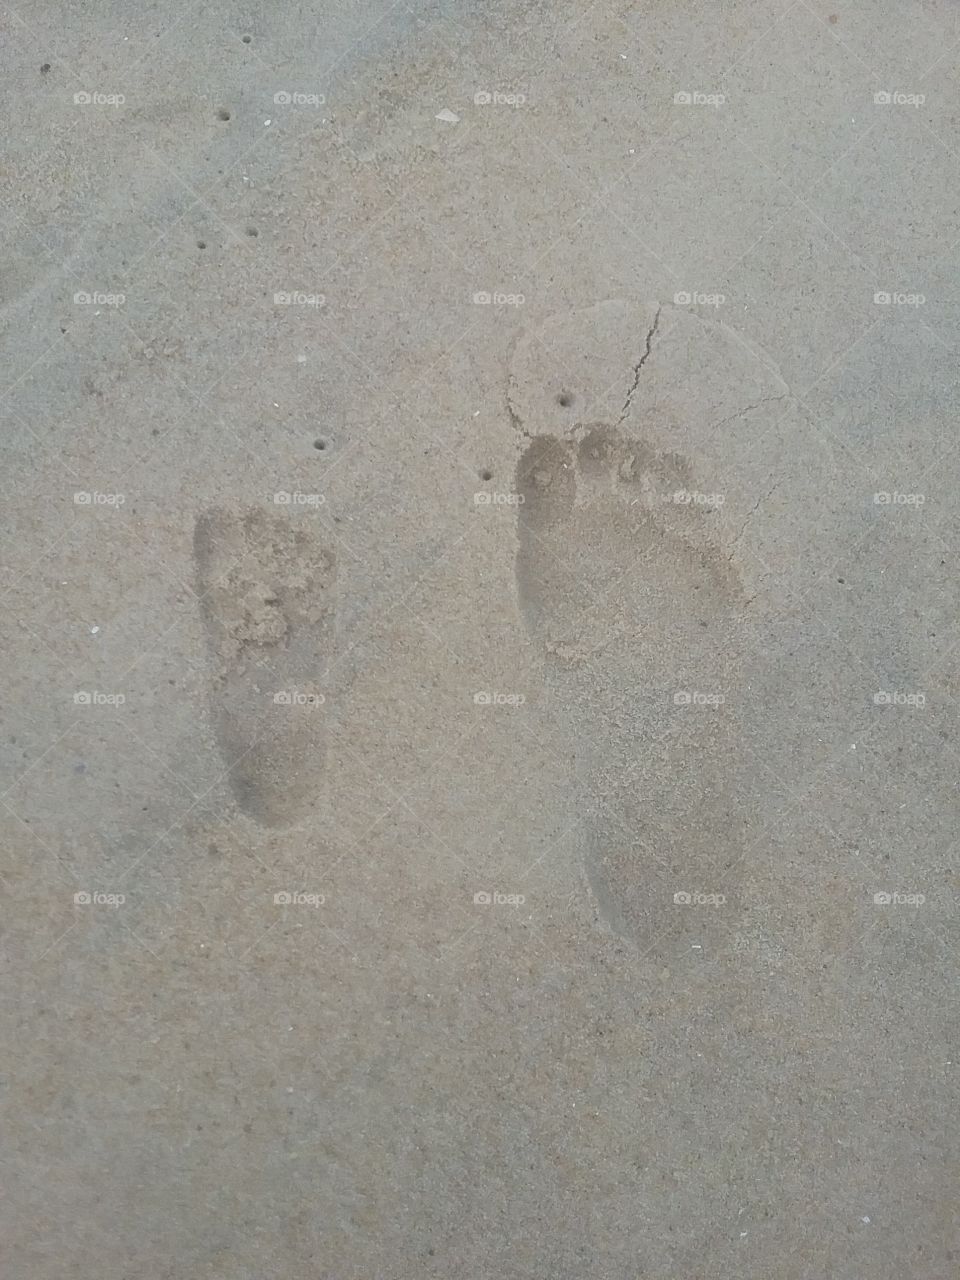 Big & Little Footprints in the Sand